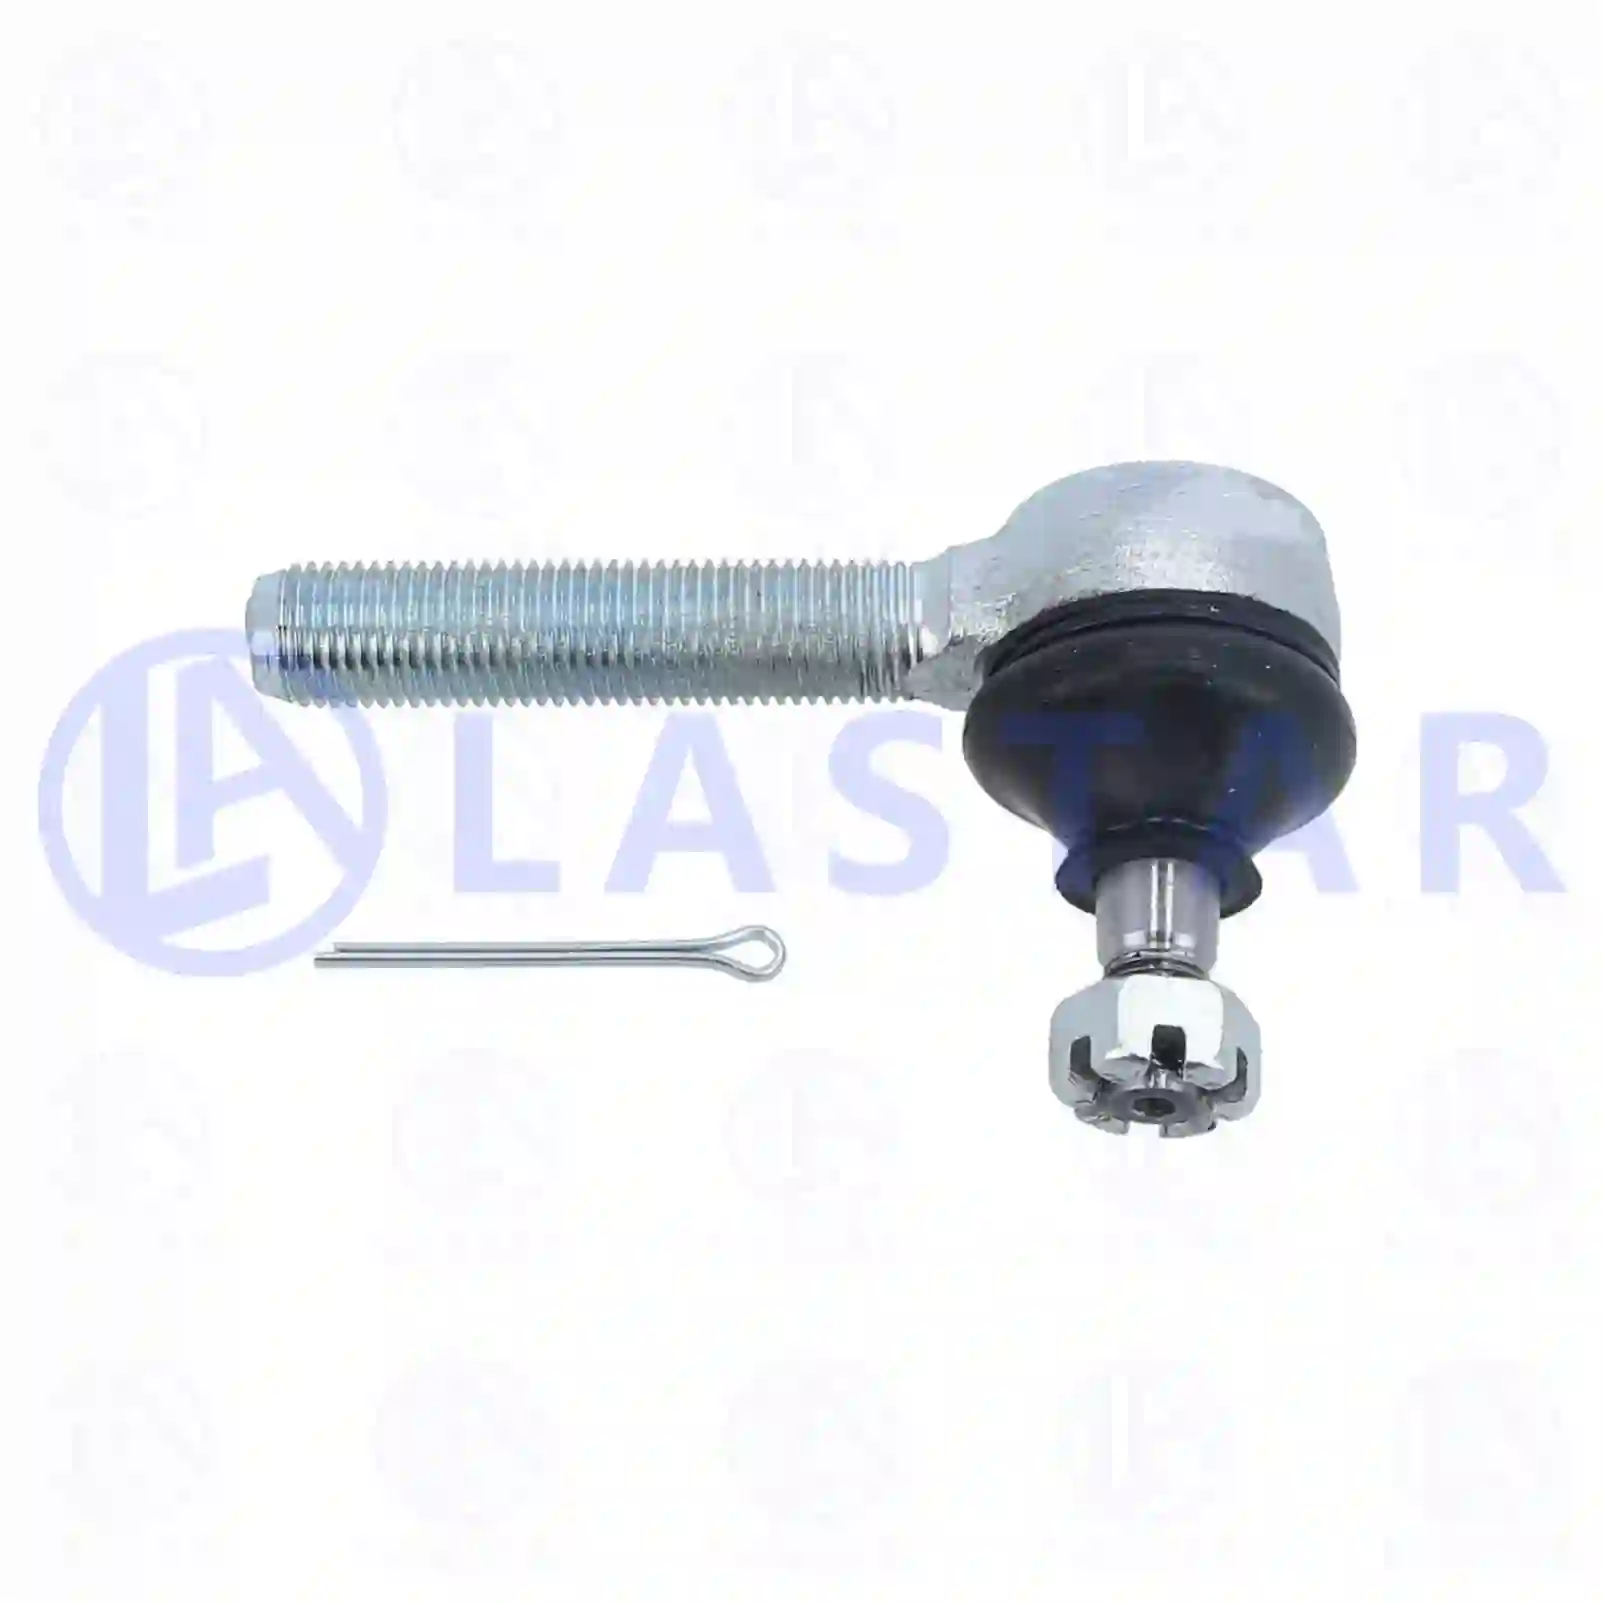 Gear Shift Lever Ball joint, right hand thread, la no: 77731885 ,  oem no:0386930, 386930, 391493, 649923, 03435786, 07981909, 86027074, 7399424, 03435786, 42487482, 1334525, 01278679, 03435786, 06853913, 07981909, 3435786, 42487482, 7981909, 86027074, 500607008, 81953010038, 81953010045, 81953016016, 81953016169, 81953016172, 81953016176, 81953016235, 81953016266, 81953016269, 81953016300, 81953016302, 81953016366, A0023511301, 0002680181, 0002680189, 0002684889, 0002687389, 193689, 0023162046, 5000516214, 5010144543, 5010245591, 8321999319, 1132493, 1672152, 6027074, 6853913, 7981909, ZG40143-0008 Lastar Spare Part | Truck Spare Parts, Auotomotive Spare Parts